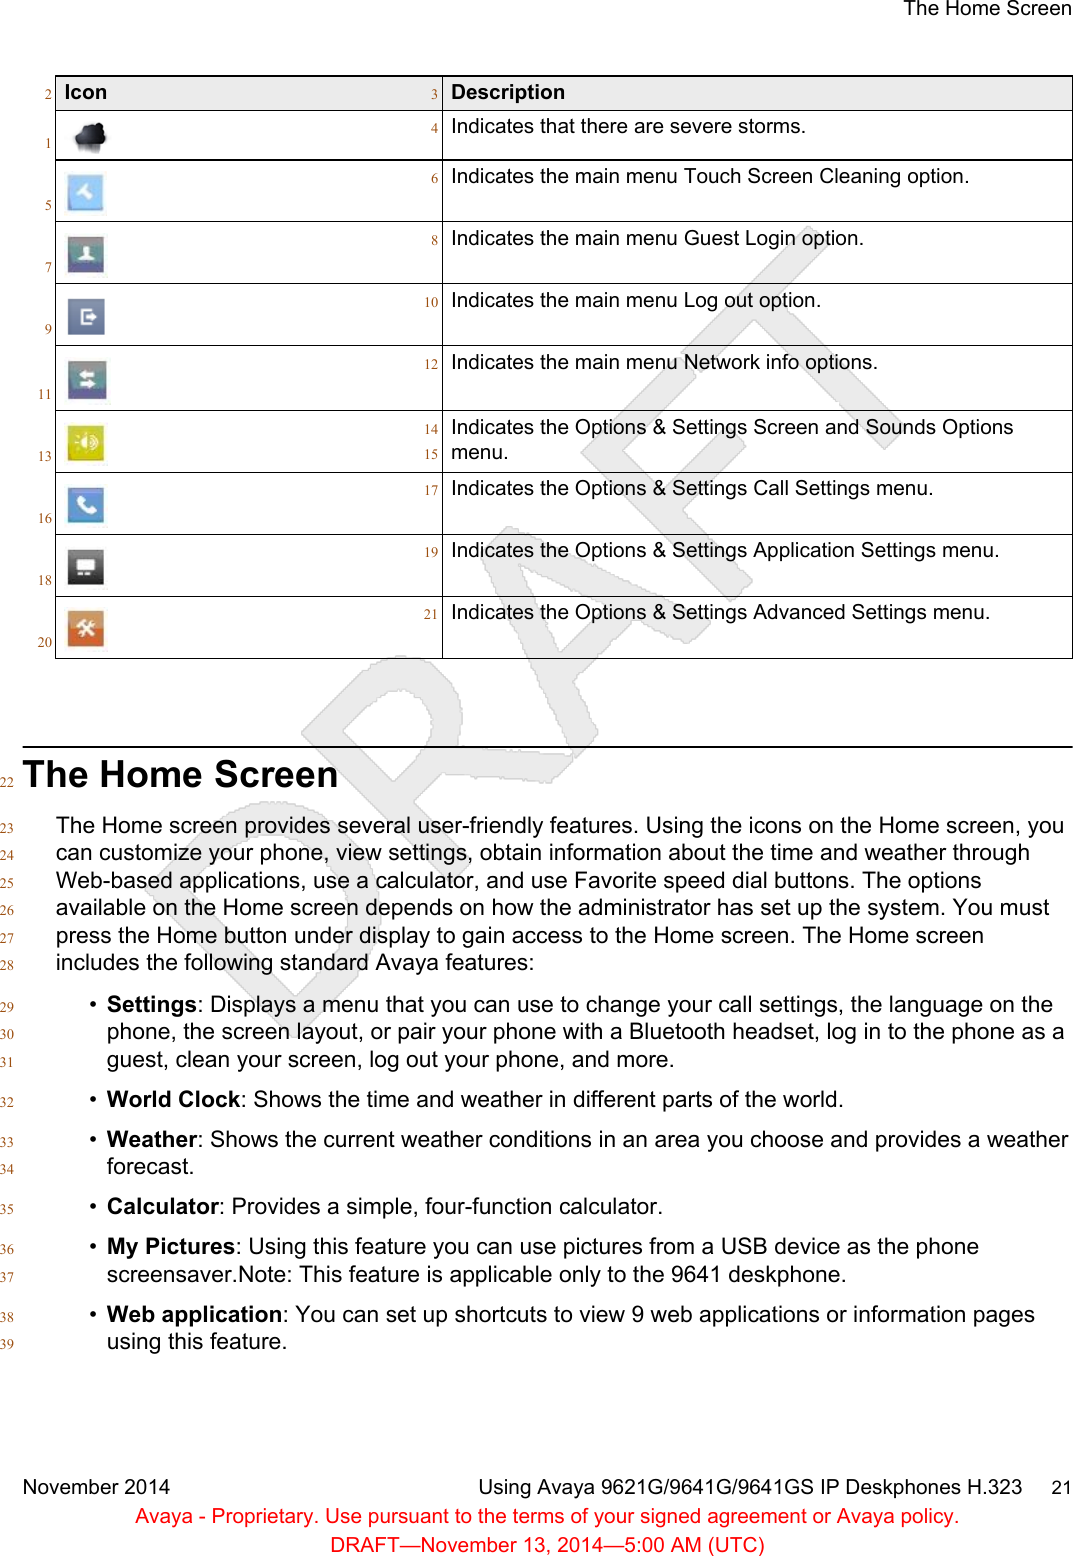 Icon2Description31Indicates that there are severe storms.45Indicates the main menu Touch Screen Cleaning option.67Indicates the main menu Guest Login option.89Indicates the main menu Log out option.1011Indicates the main menu Network info options.1213Indicates the Options &amp; Settings Screen and Sounds Options14menu.1516Indicates the Options &amp; Settings Call Settings menu.1718Indicates the Options &amp; Settings Application Settings menu.1920Indicates the Options &amp; Settings Advanced Settings menu.21The Home Screen22The Home screen provides several user-friendly features. Using the icons on the Home screen, you23can customize your phone, view settings, obtain information about the time and weather through24Web-based applications, use a calculator, and use Favorite speed dial buttons. The options25available on the Home screen depends on how the administrator has set up the system. You must26press the Home button under display to gain access to the Home screen. The Home screen27includes the following standard Avaya features:28•Settings: Displays a menu that you can use to change your call settings, the language on the29phone, the screen layout, or pair your phone with a Bluetooth headset, log in to the phone as a30guest, clean your screen, log out your phone, and more.31•World Clock: Shows the time and weather in different parts of the world.32•Weather: Shows the current weather conditions in an area you choose and provides a weather33forecast.34•Calculator: Provides a simple, four-function calculator.35•My Pictures: Using this feature you can use pictures from a USB device as the phone36screensaver.Note: This feature is applicable only to the 9641 deskphone.37•Web application: You can set up shortcuts to view 9 web applications or information pages38using this feature.39The Home ScreenNovember 2014 Using Avaya 9621G/9641G/9641GS IP Deskphones H.323     21Avaya - Proprietary. Use pursuant to the terms of your signed agreement or Avaya policy.DRAFT—November 13, 2014—5:00 AM (UTC)